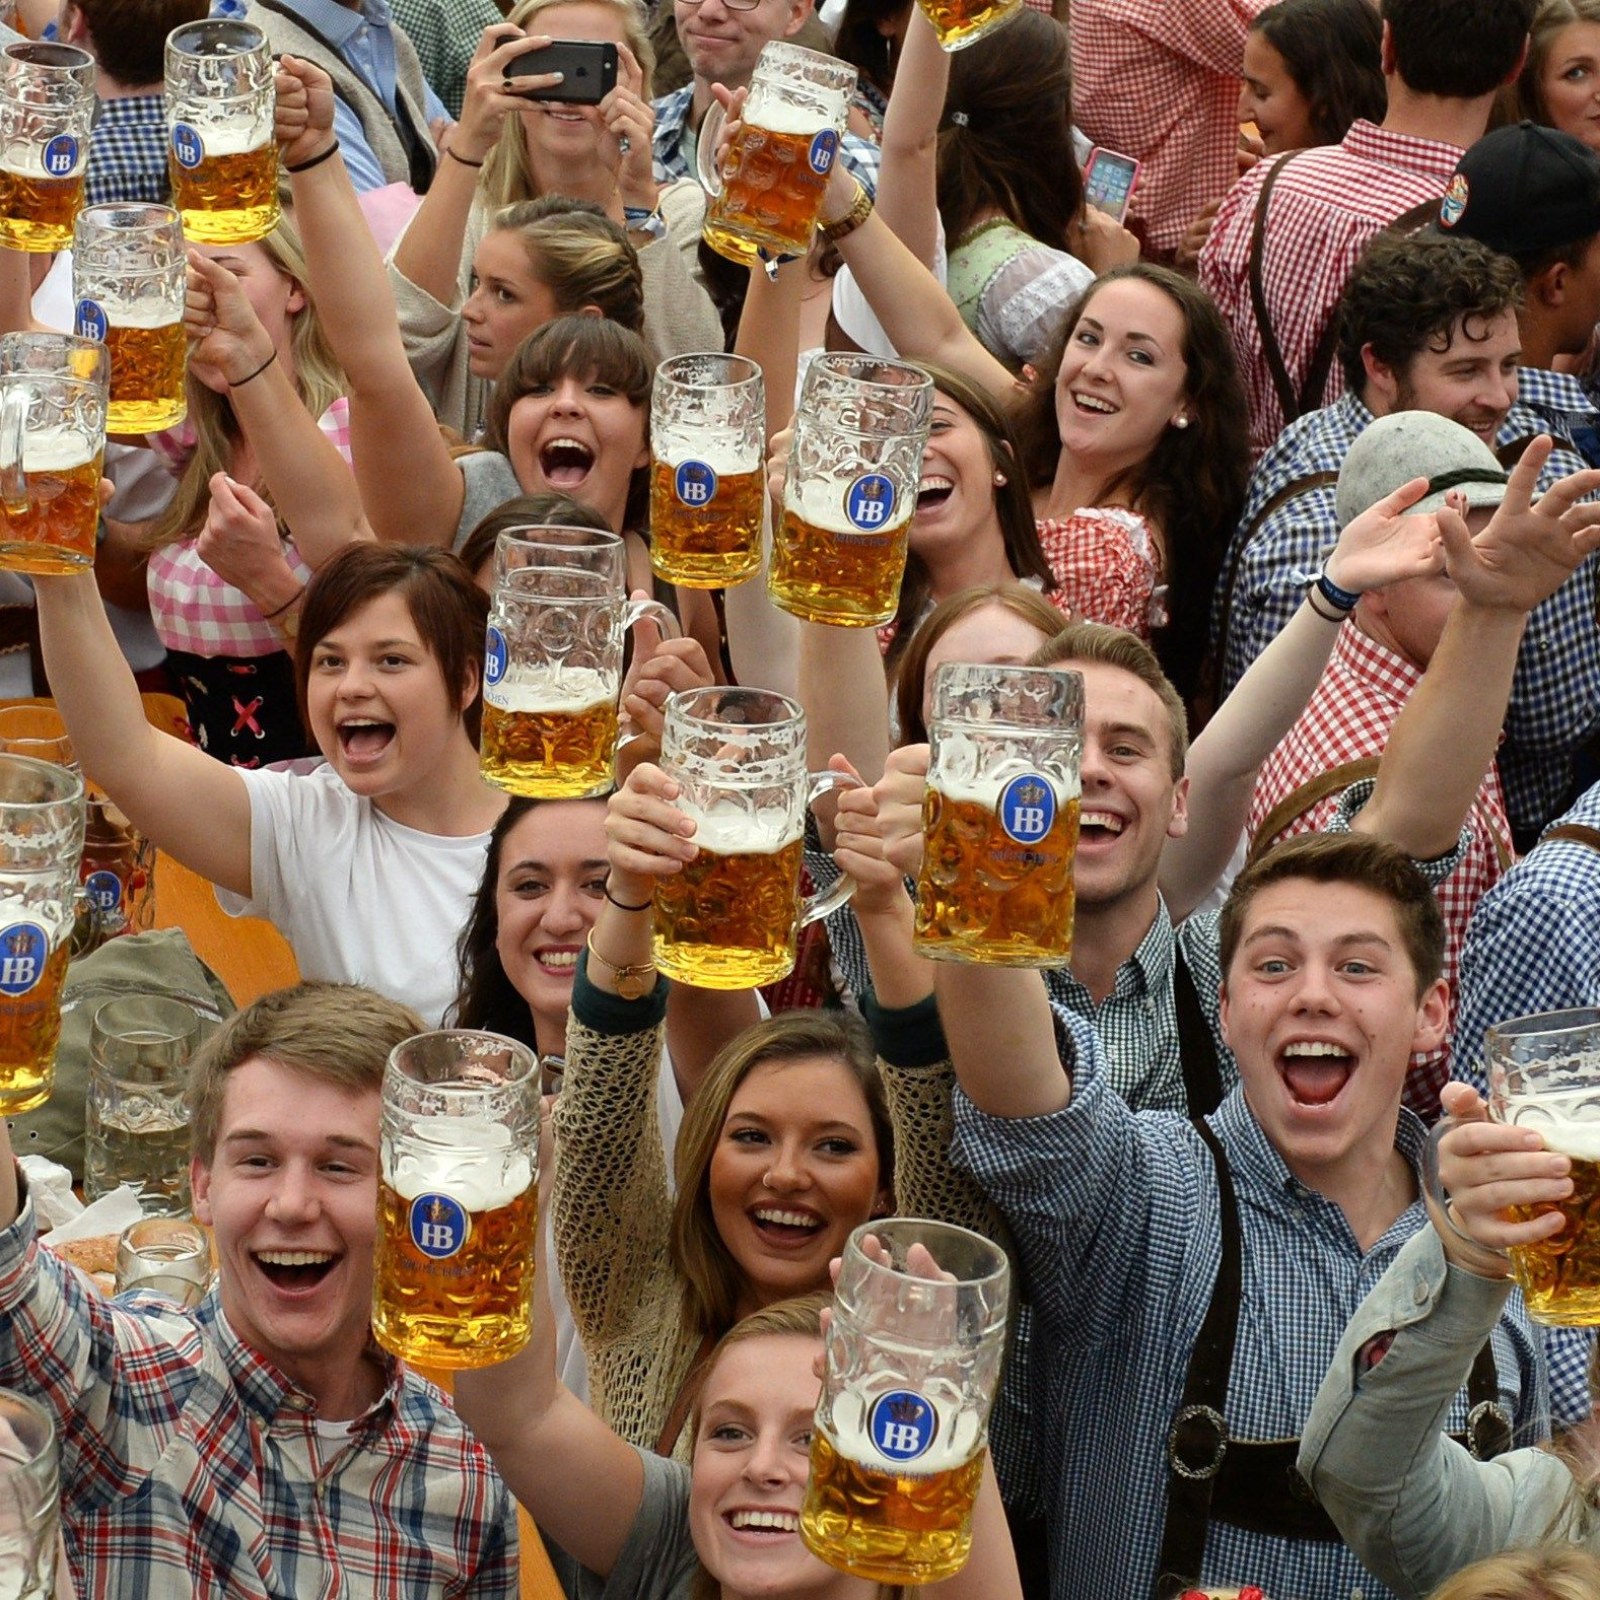 Spies At Oktoberfest? German Intelligence Agency Pays For Secret Agents To  Get Drunk At Annual Beer Celebration, Report Finds